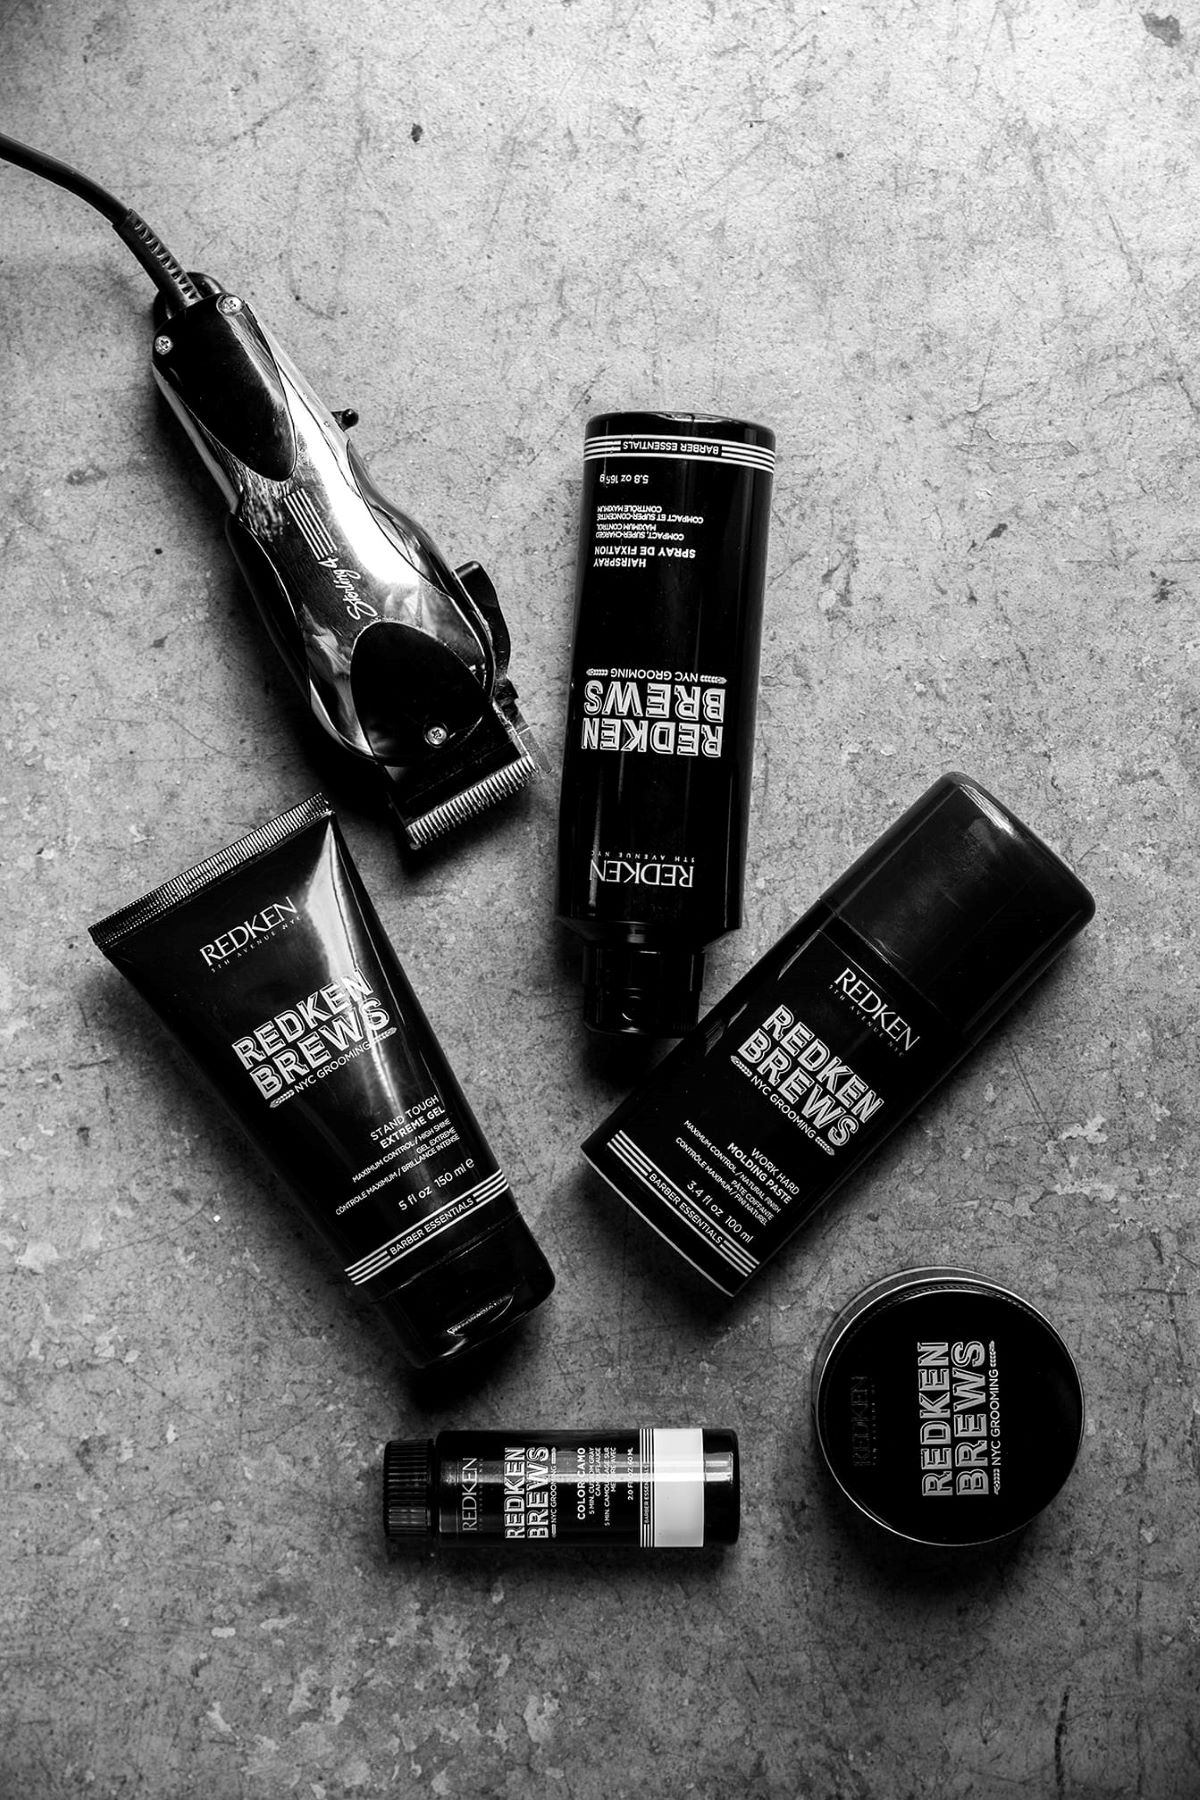 Redken Brews haircare and skincare products